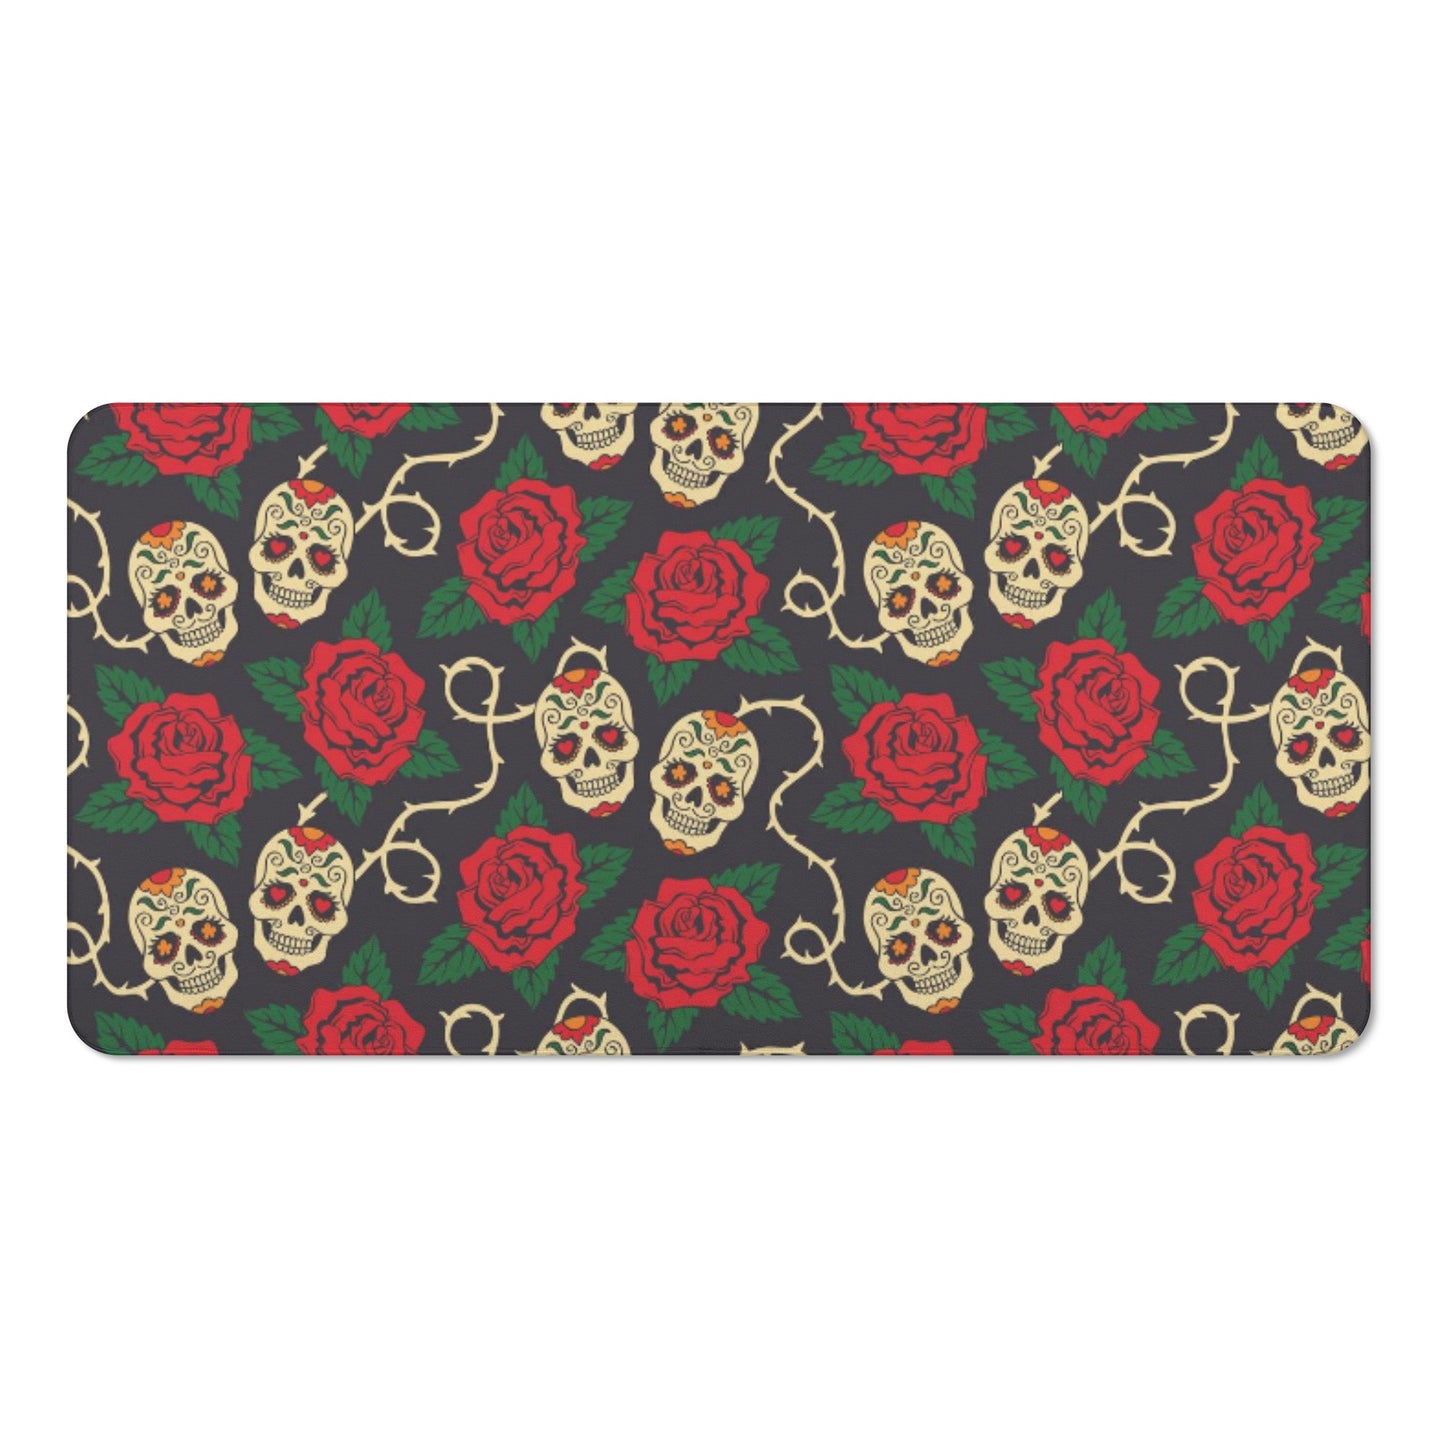 Floral rose day of the dead Bath Towel